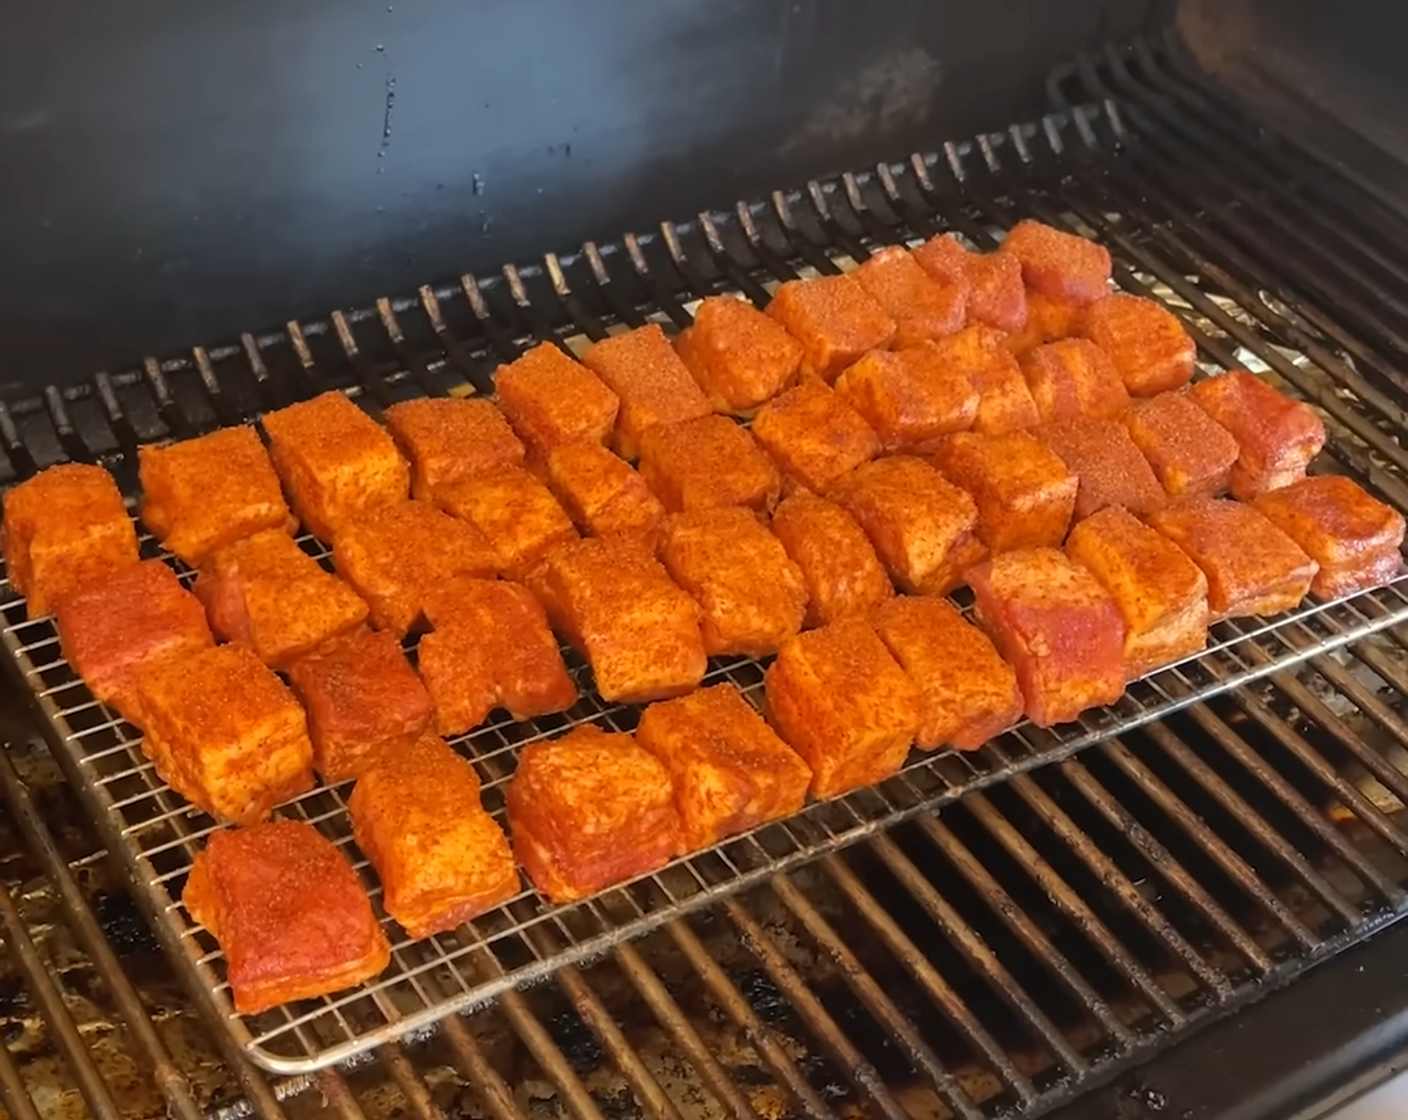 step 3 Spray a raised cooking rack with Vegetable Oil (as needed) and place pork belly pieces on the rack. Cook on the pellet grill for 2 hours.